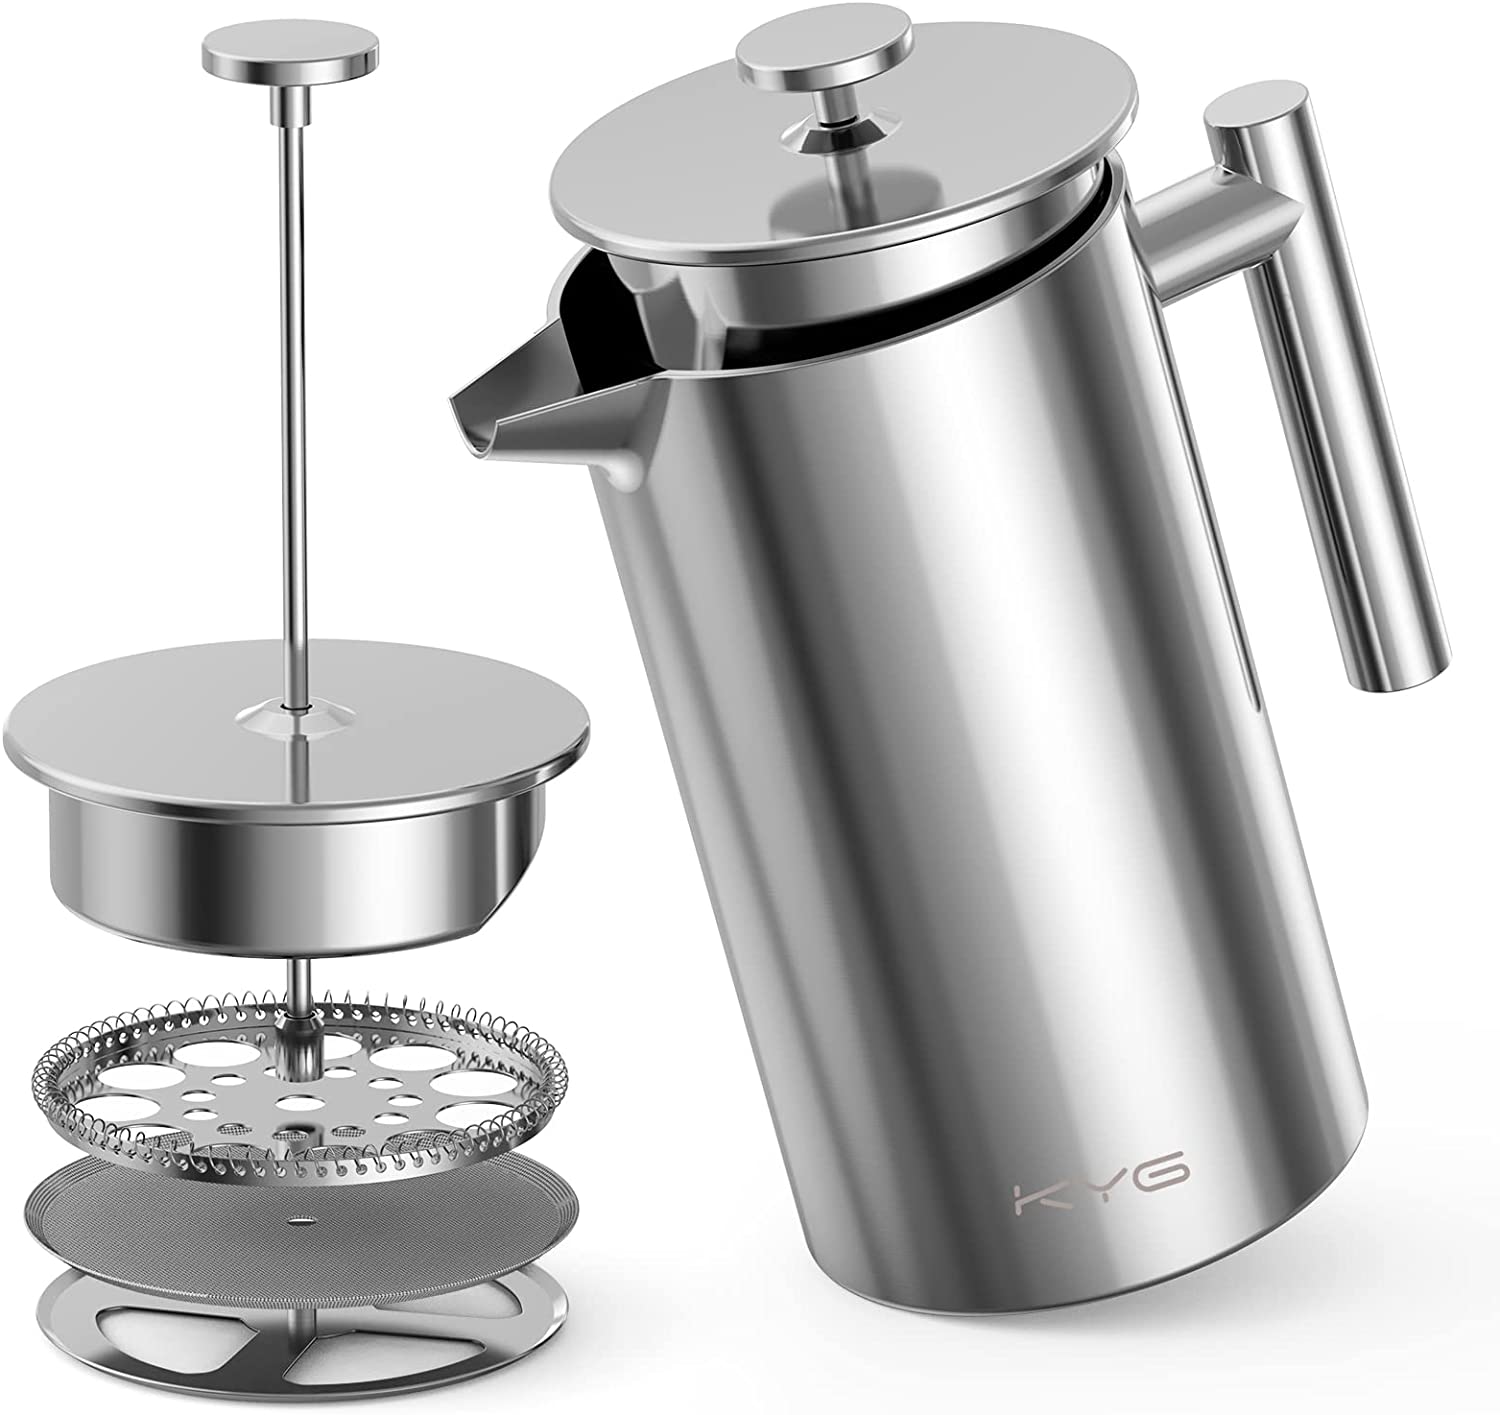 KYG Coffee Maker, Stainless Steel, French Press System with 5 Stainless Steel Filters, Double-Walled French Coffee Press, 1L